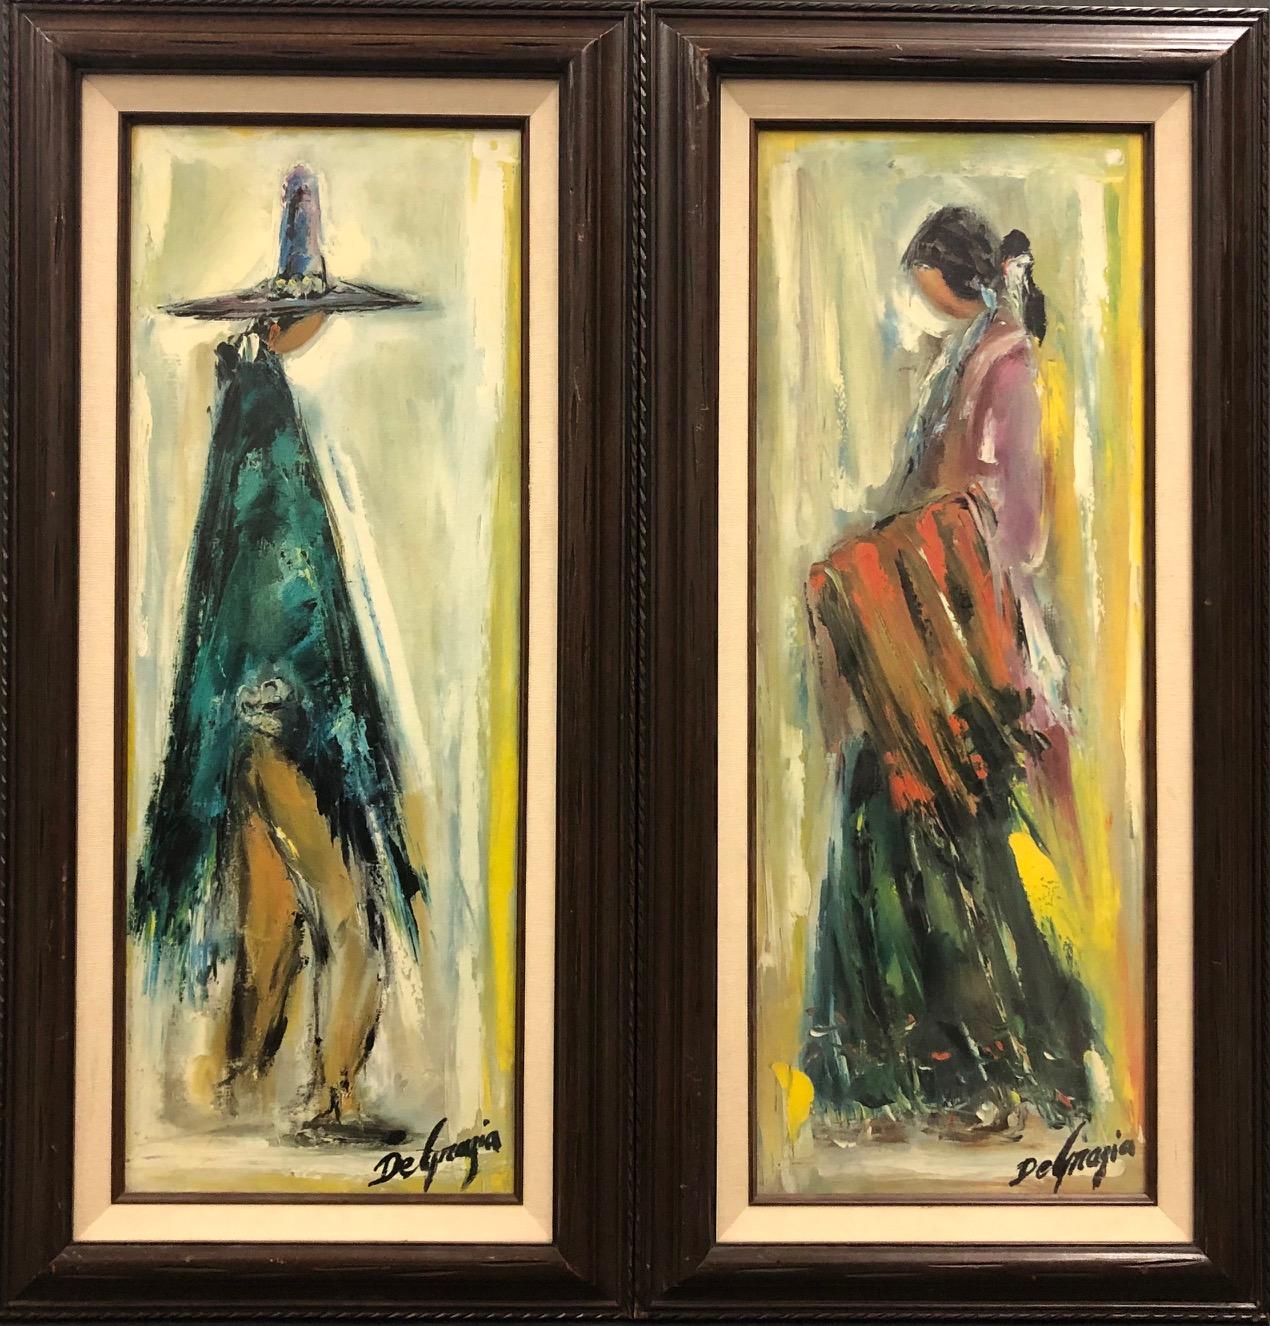 Ettore “Ted” DeGrazia Portrait Print - Navajo Bride and Groom-Individually Framed Diptych. 